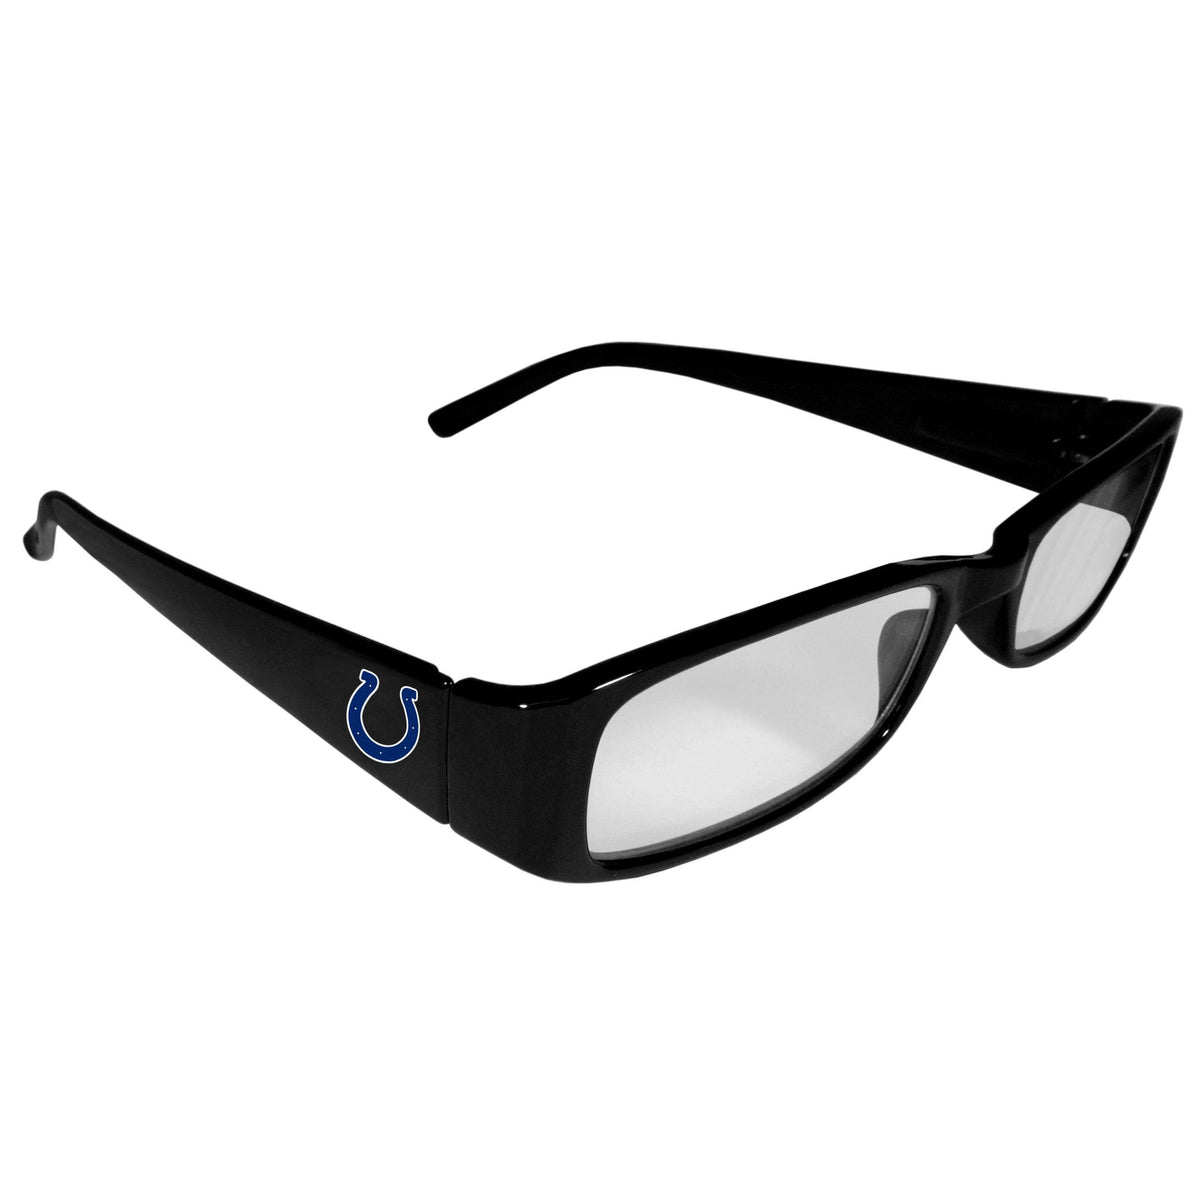 Indianapolis Colts Printed Reading Glasses, +2.25 - Flyclothing LLC